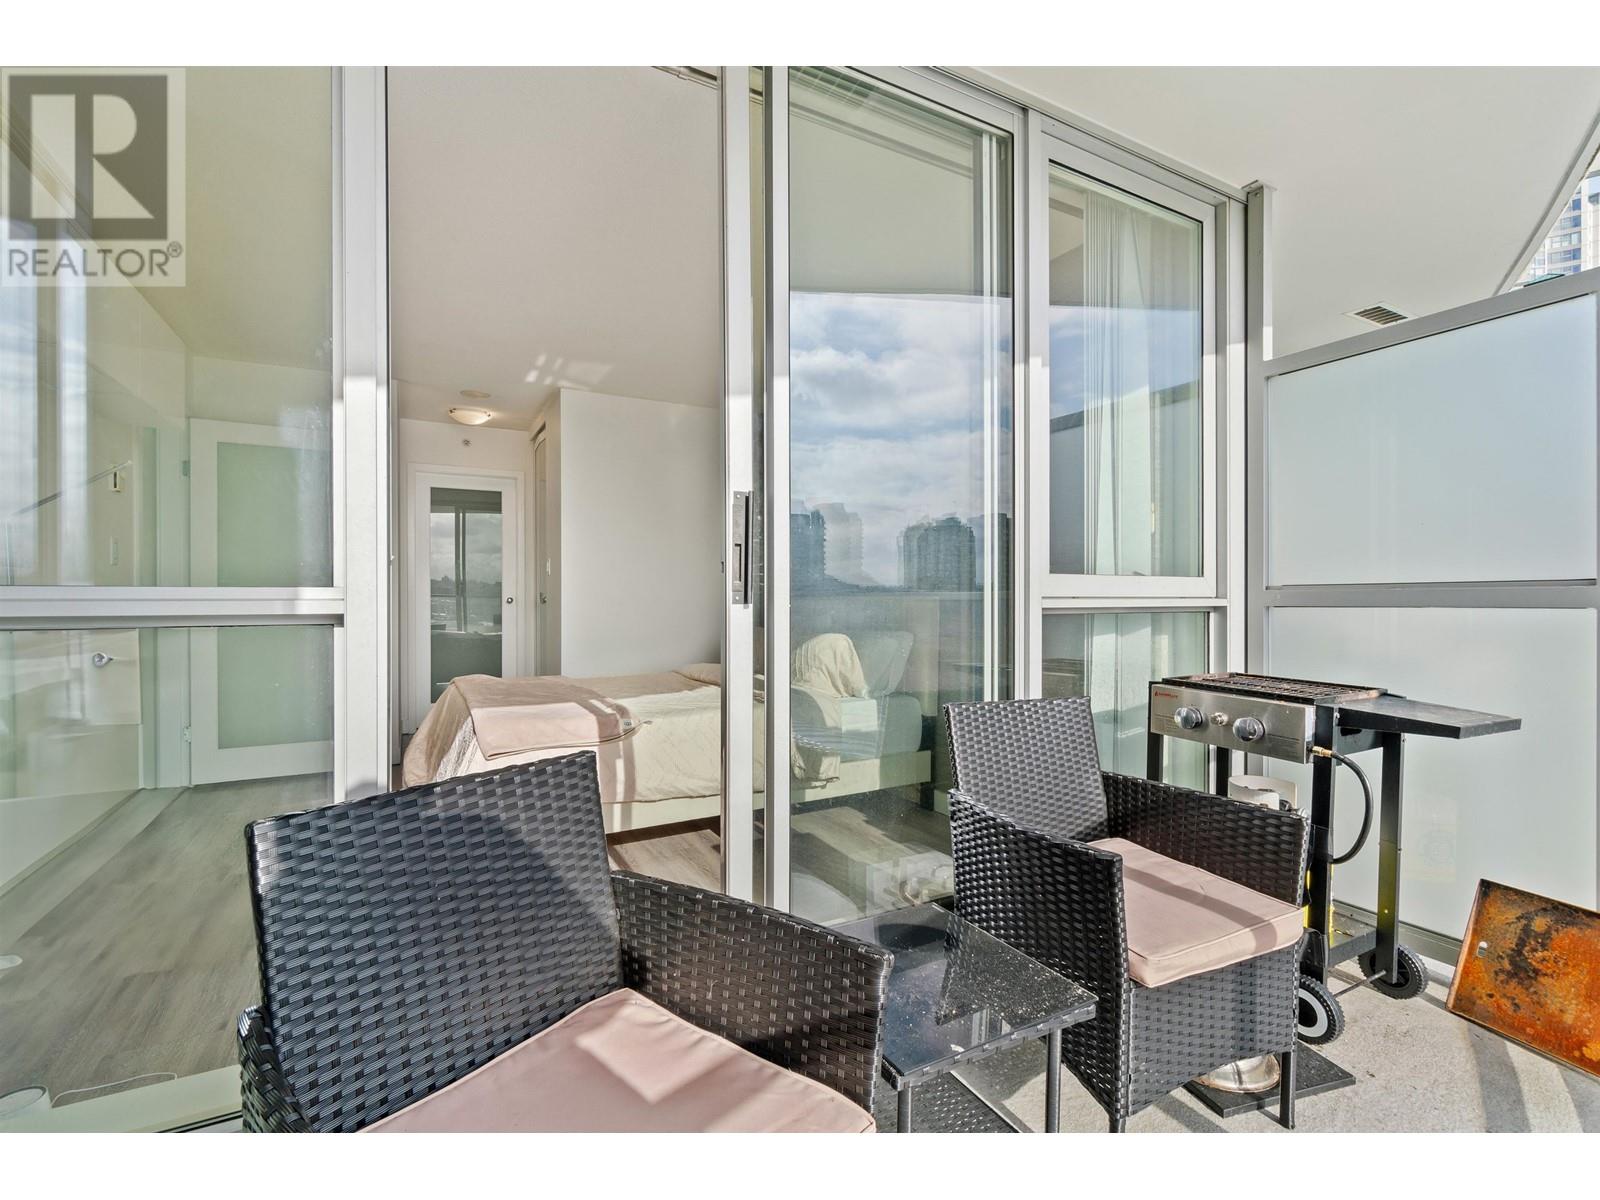 Listing Picture 20 of 33 : 508 1408 STRATHMORE MEWS, Vancouver / 溫哥華 - 魯藝地產 Yvonne Lu Group - MLS Medallion Club Member